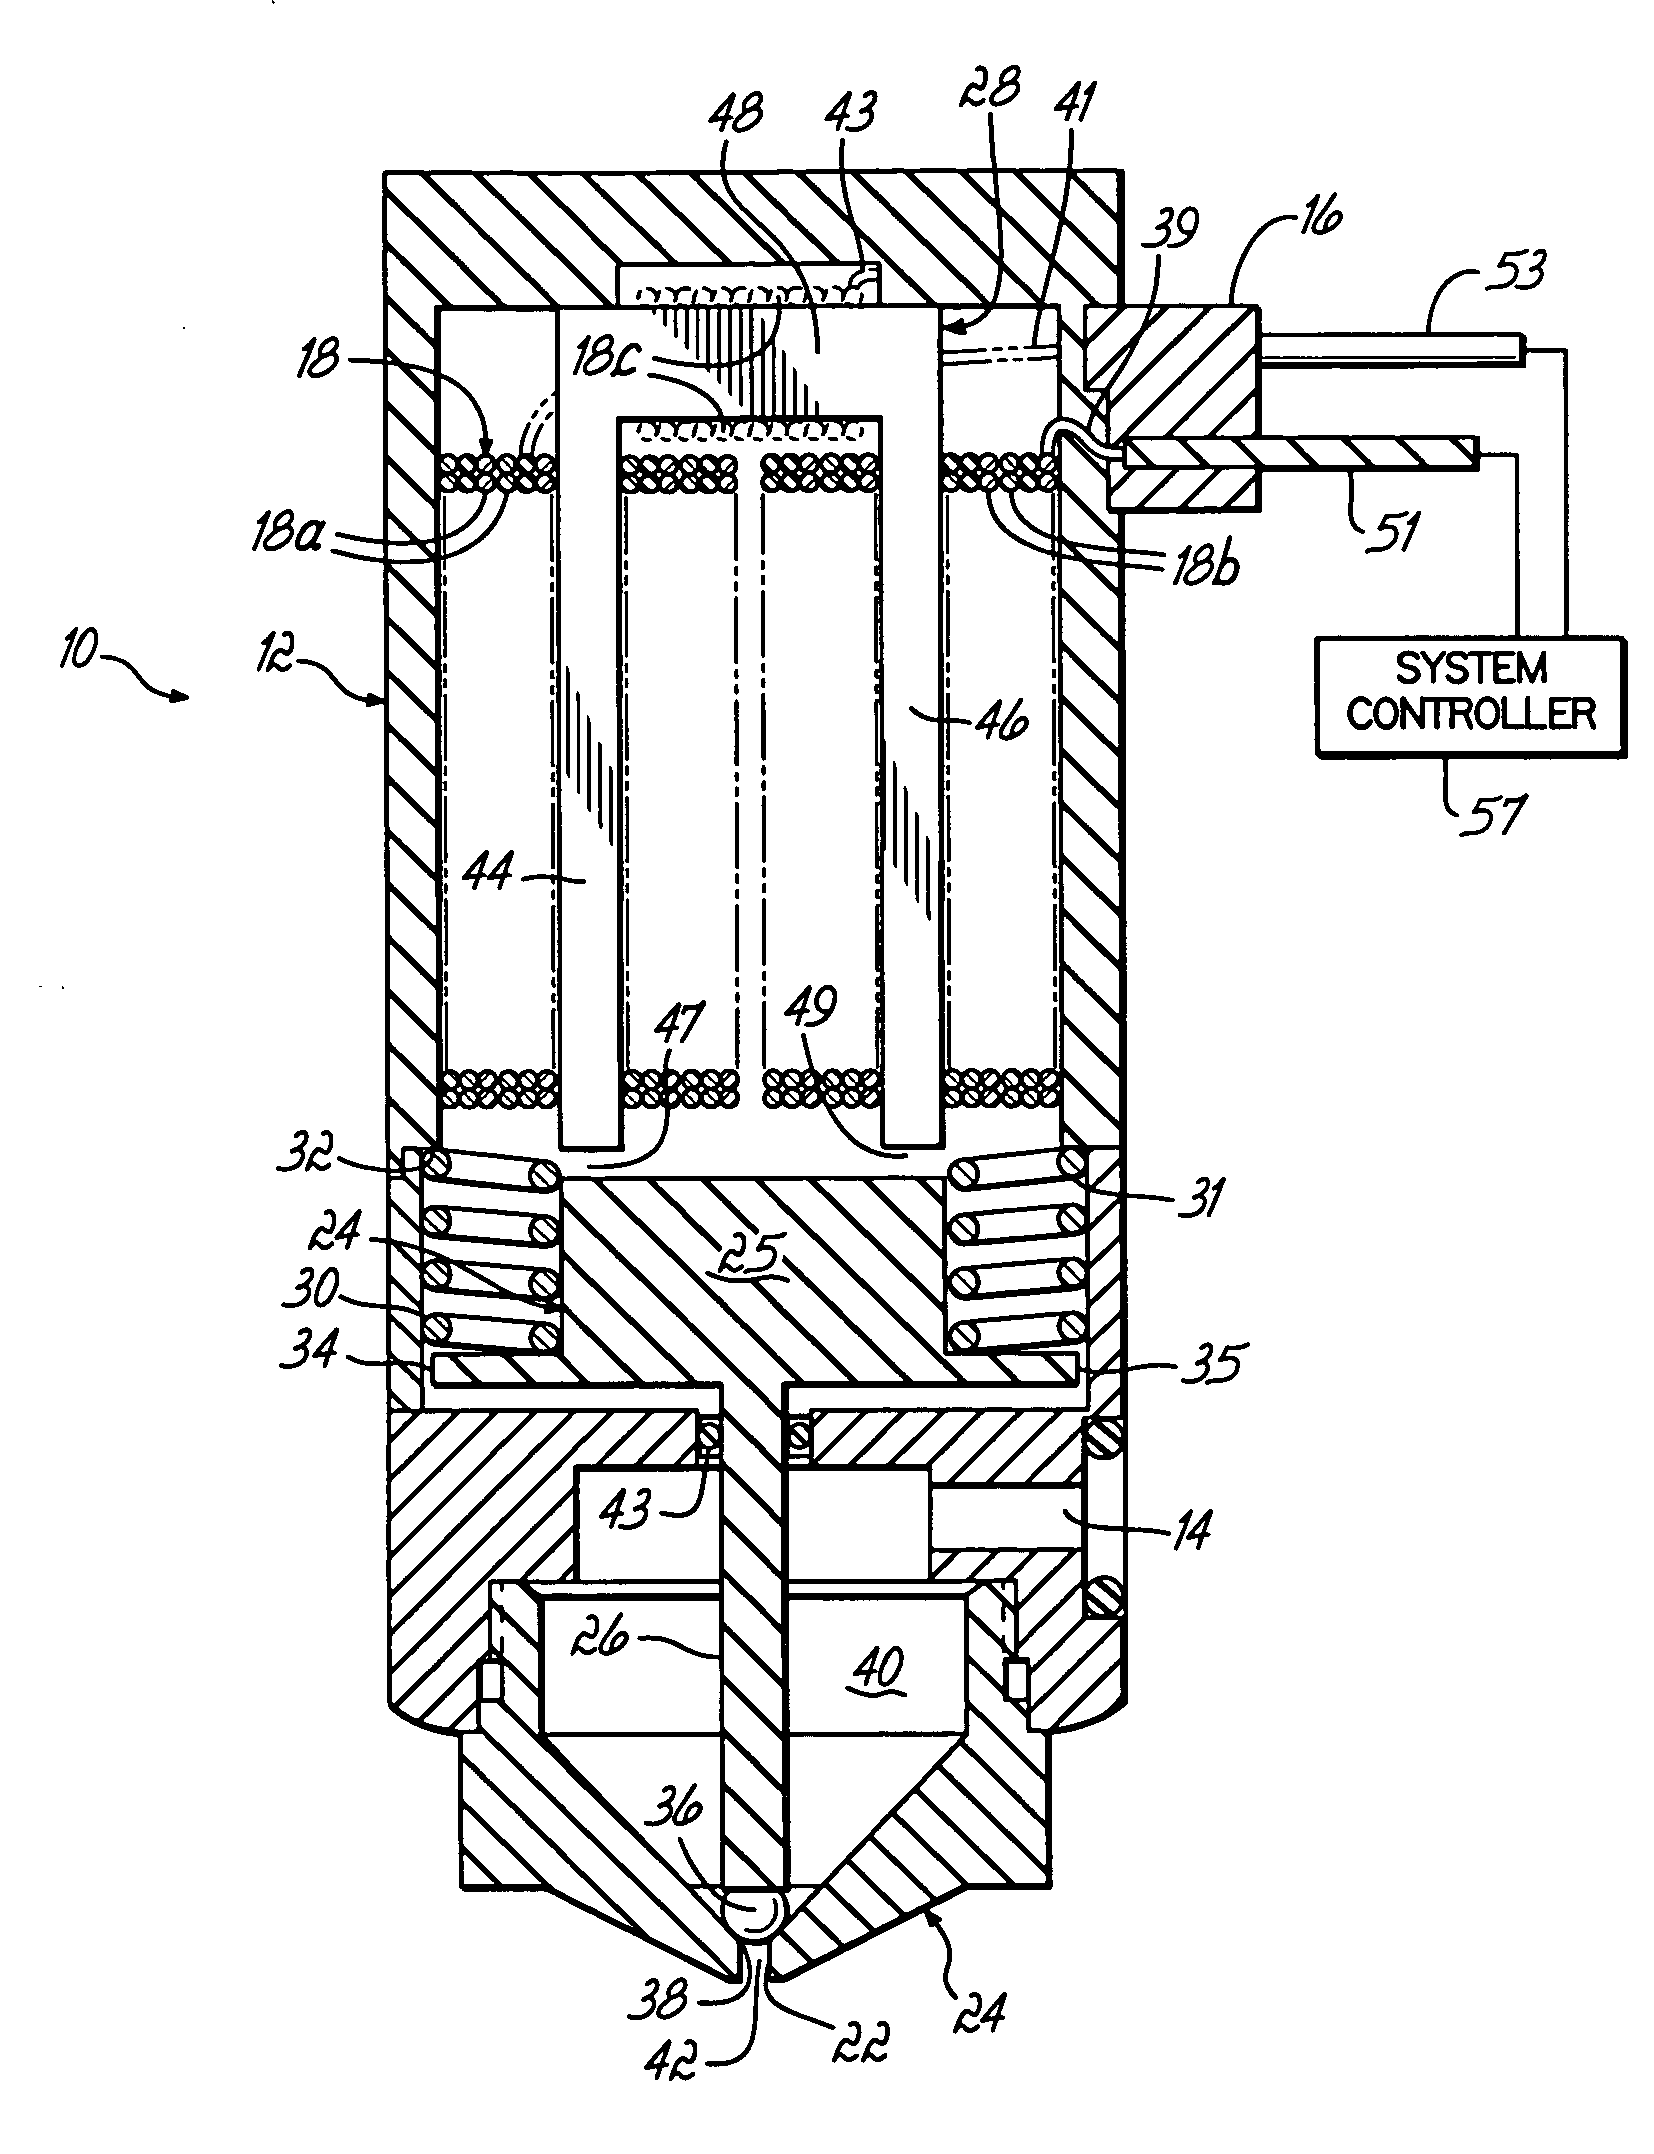 Electrically-operated dispenser